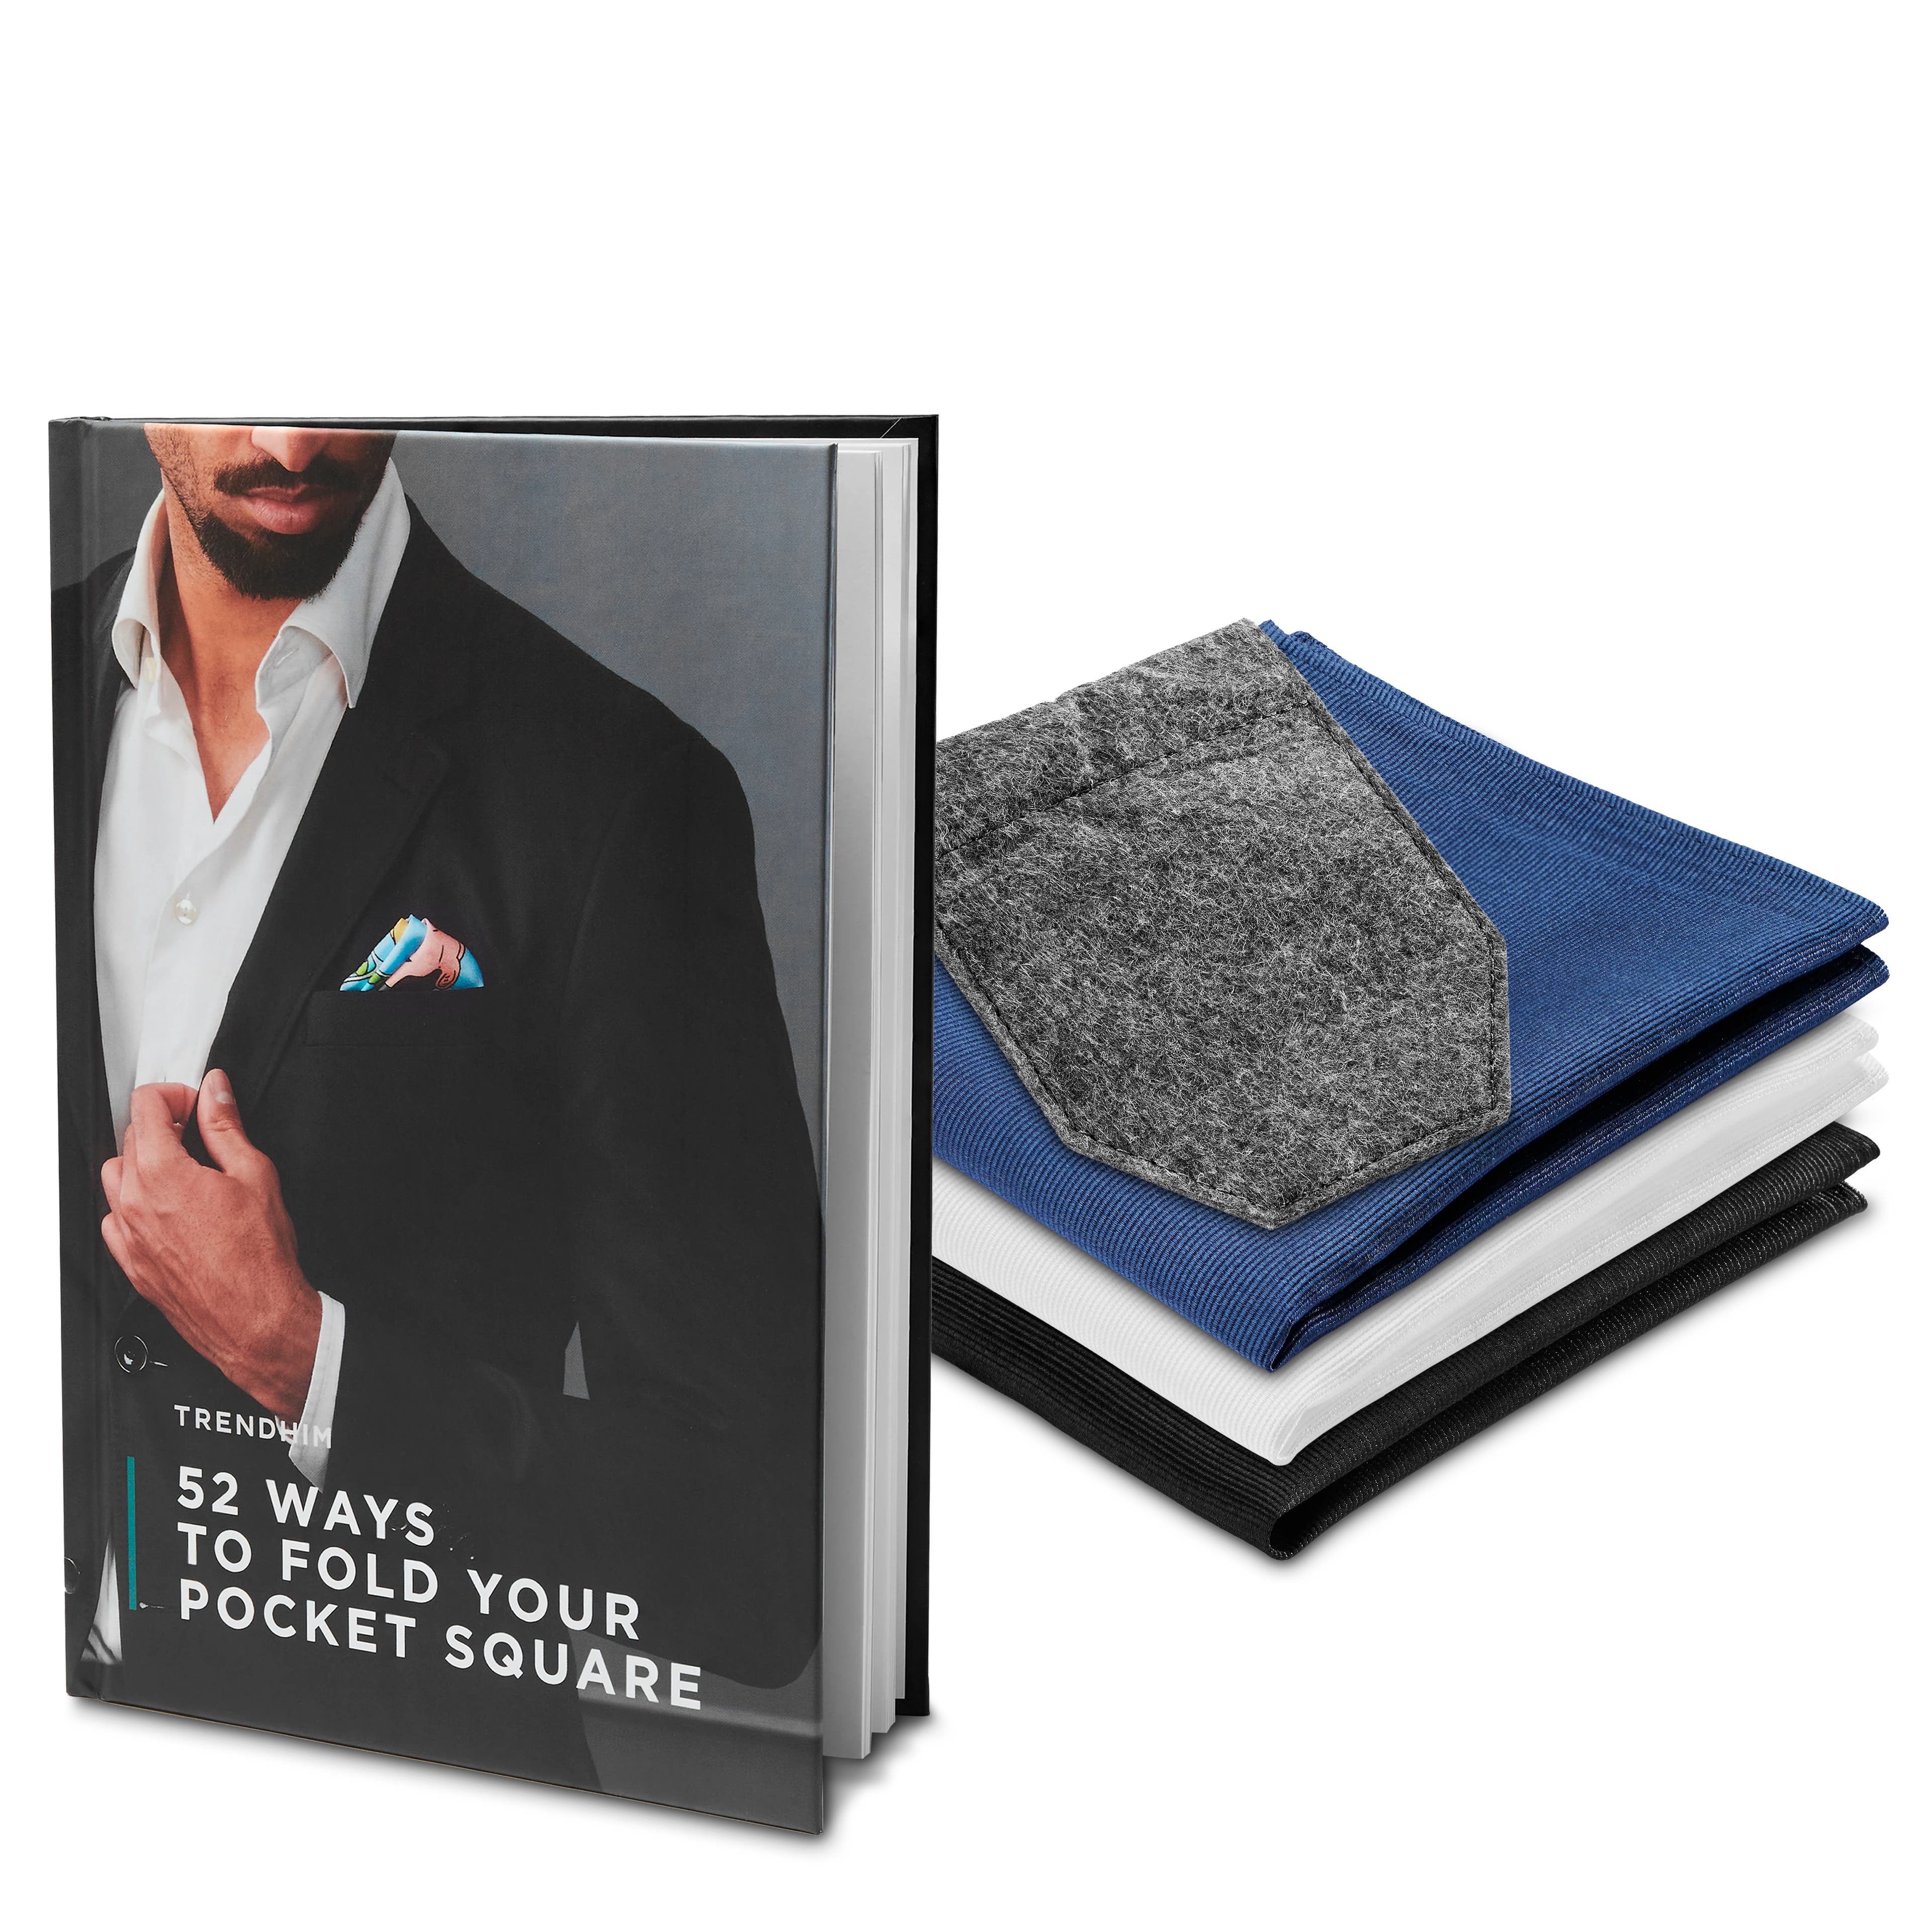 Pocket Square and Holder Set and How-To-Fold Guidebook